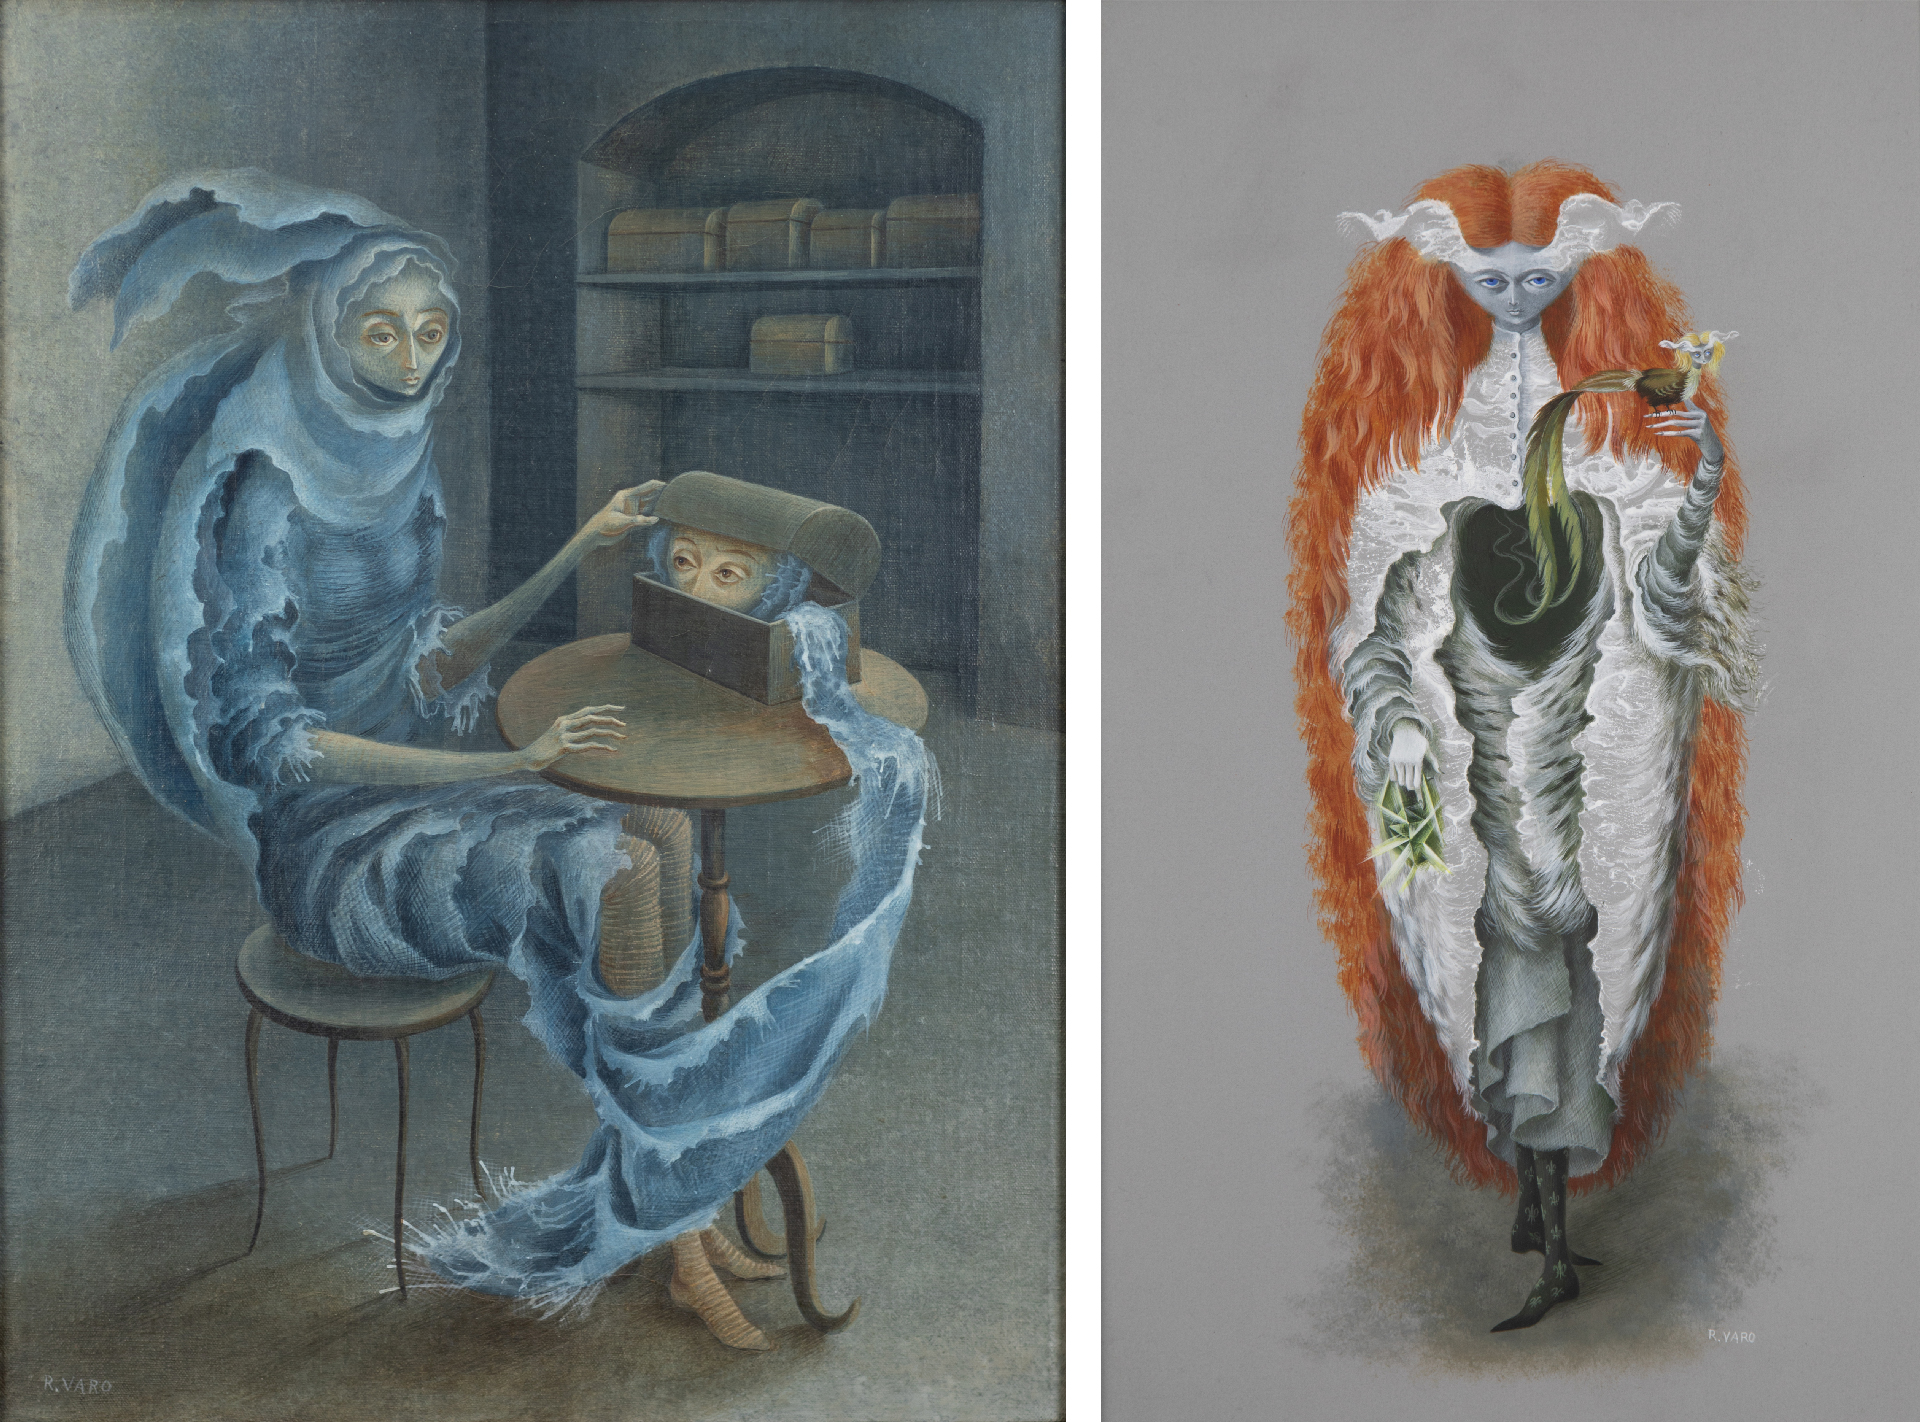 Two images: one at left of figure in watery blue cloak opening box to reveal matching eyes; one at right depicting a figure made up of frothy white waves with long red hair